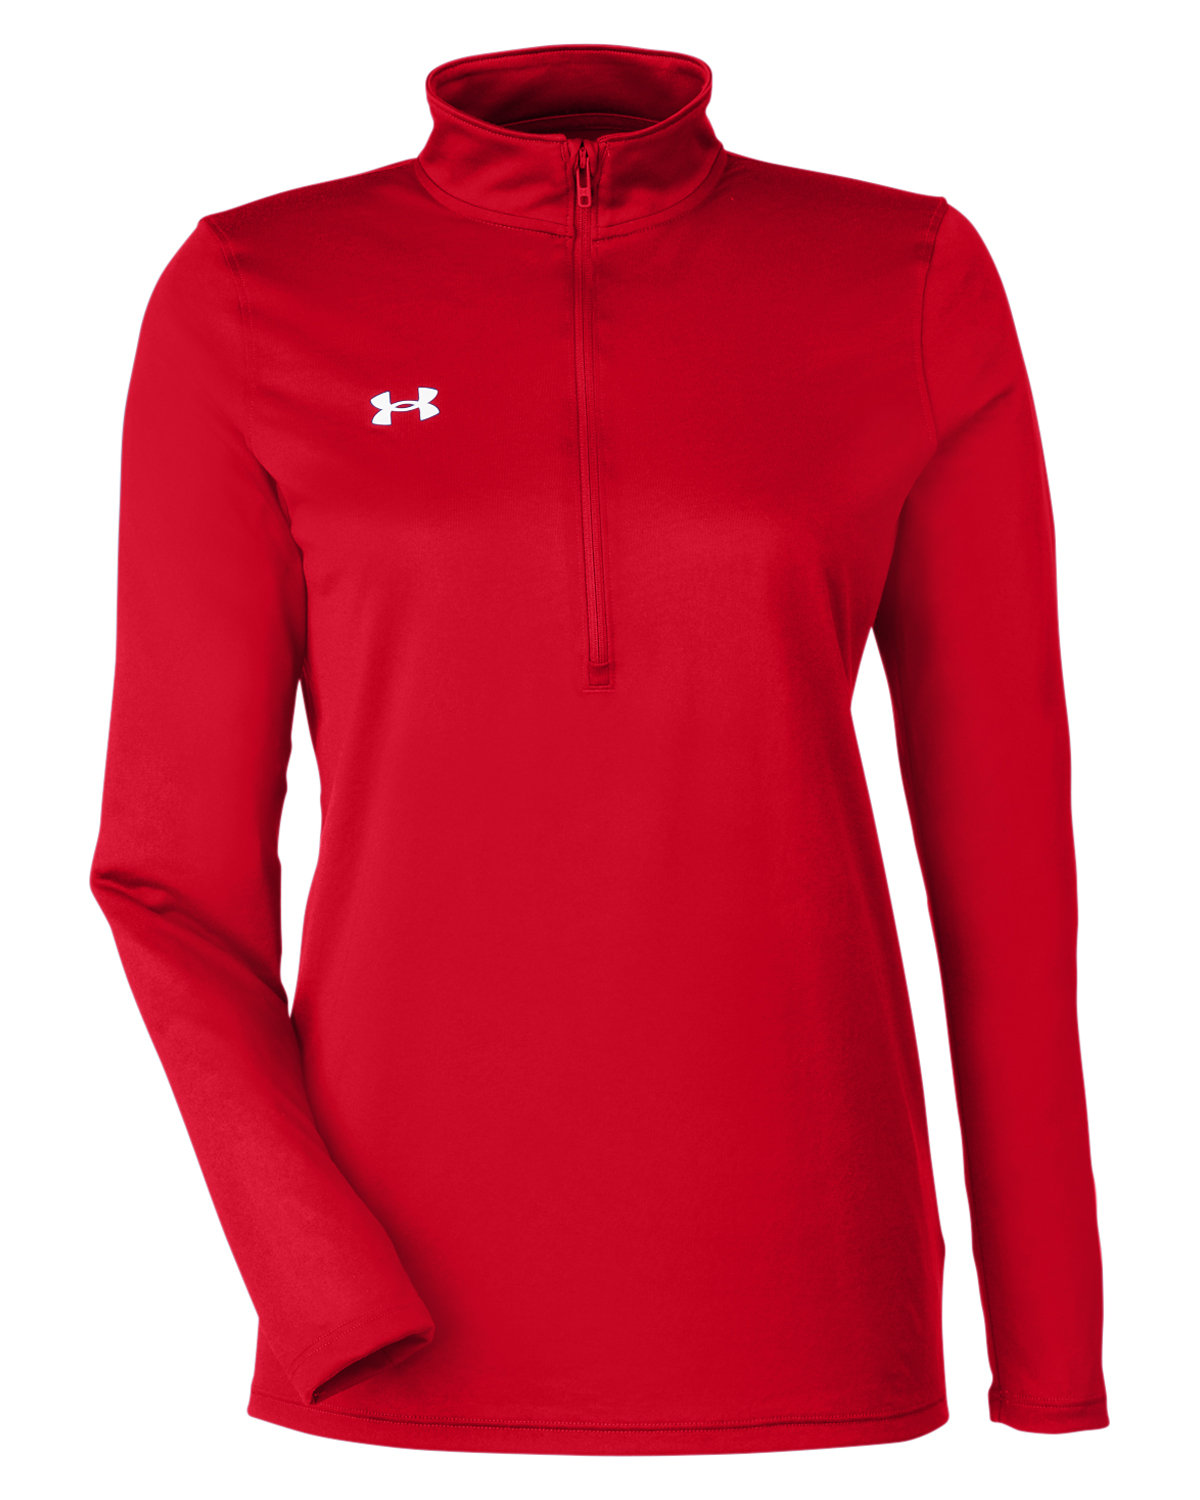 ❌SOLD❌Under Armour Coldgear leggings red Small  Leggings are not pants,  Under armour coldgear, Under armour pants